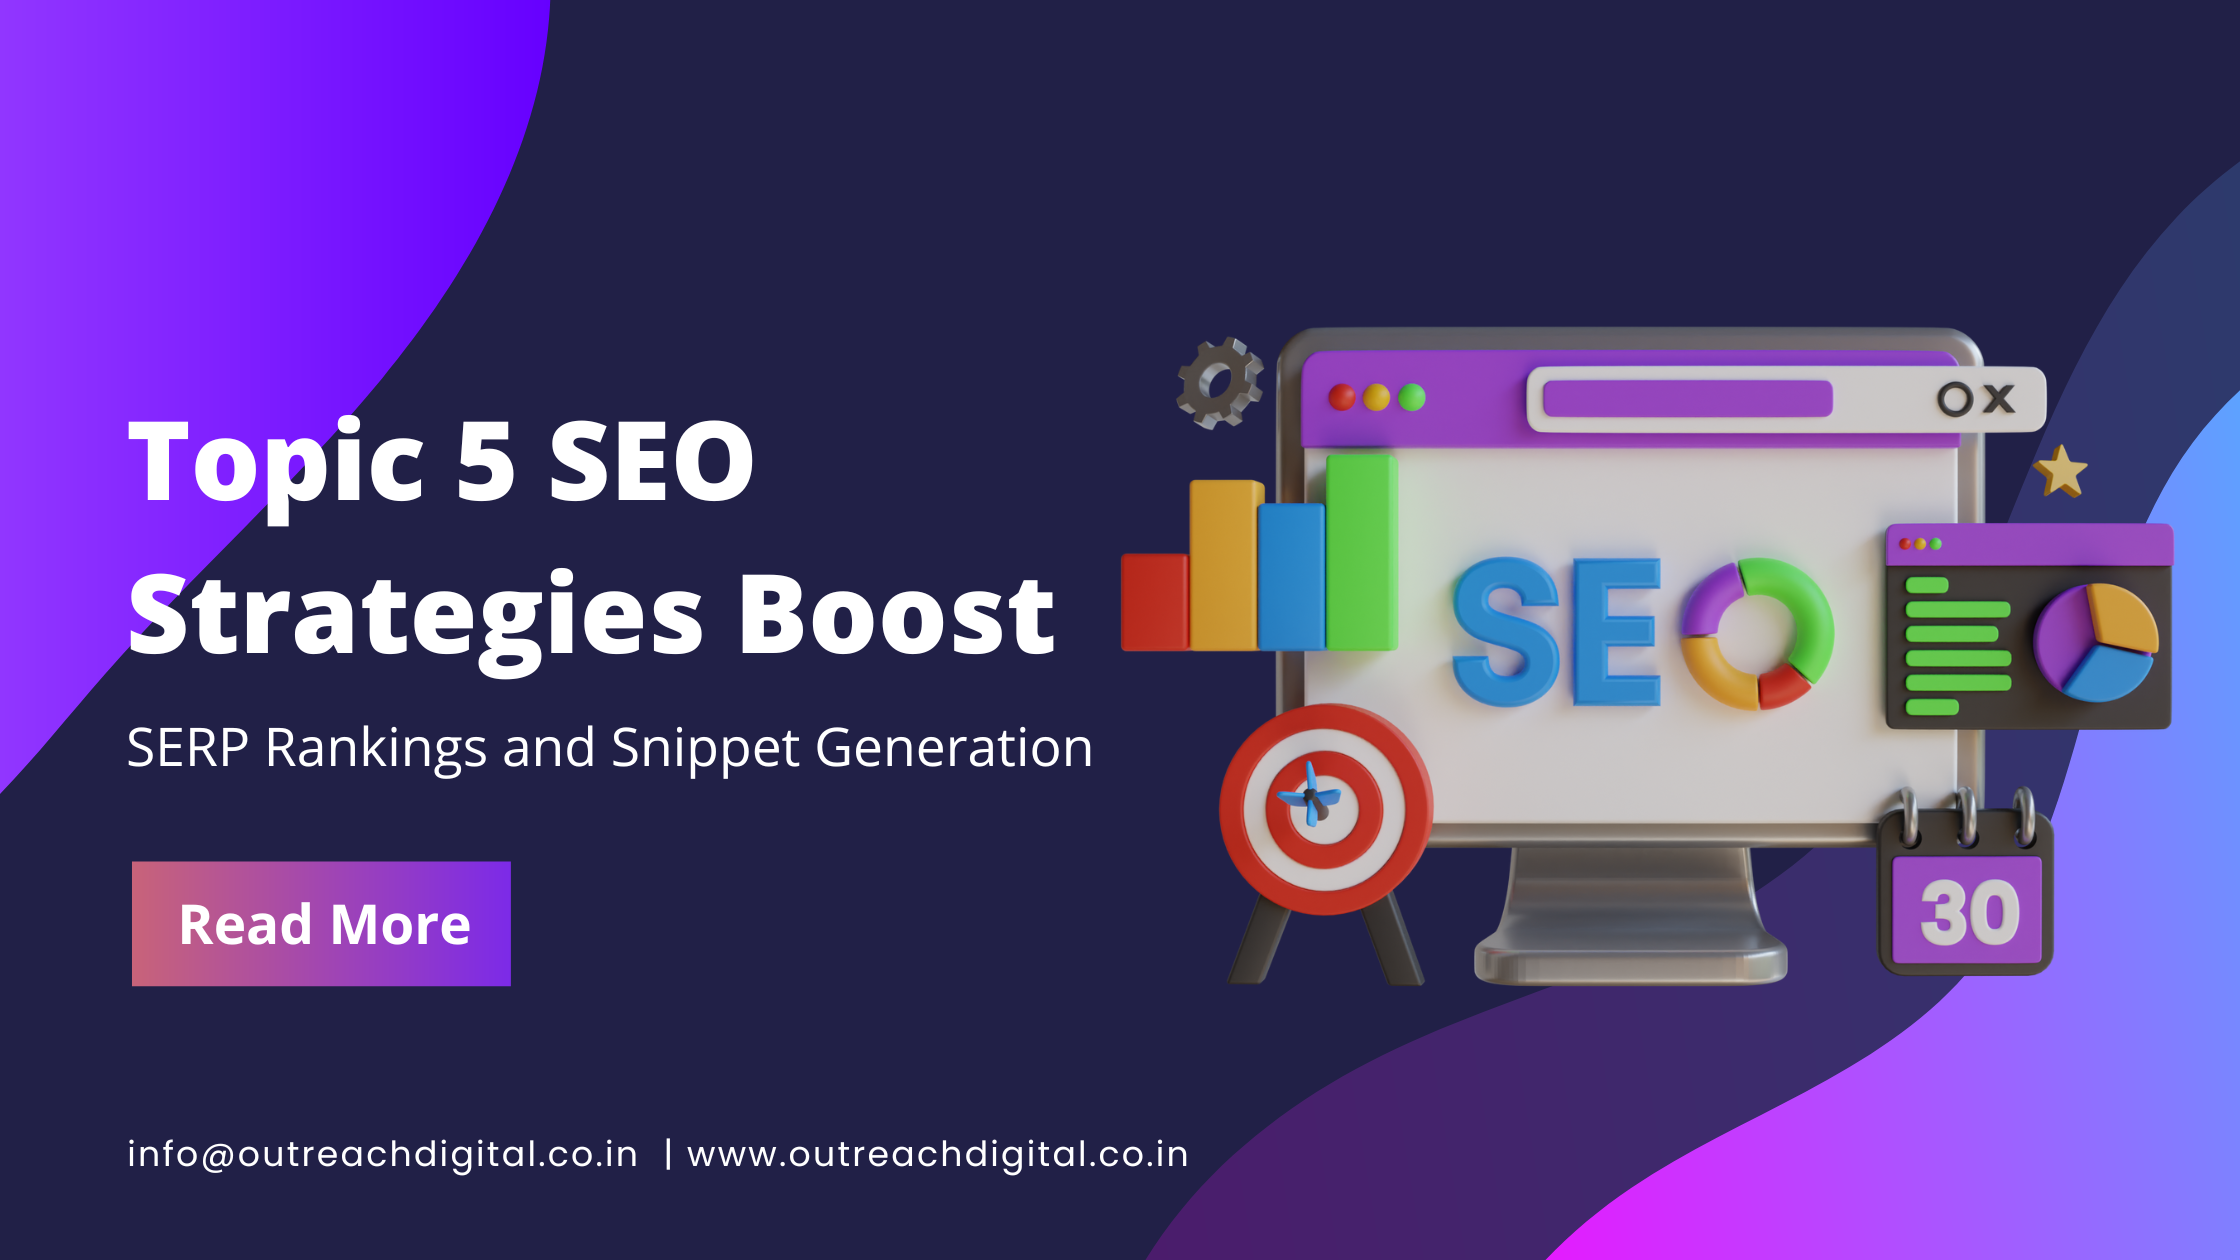 5 SEO Strategies to Boost SERP Rankings and Snippet Generation